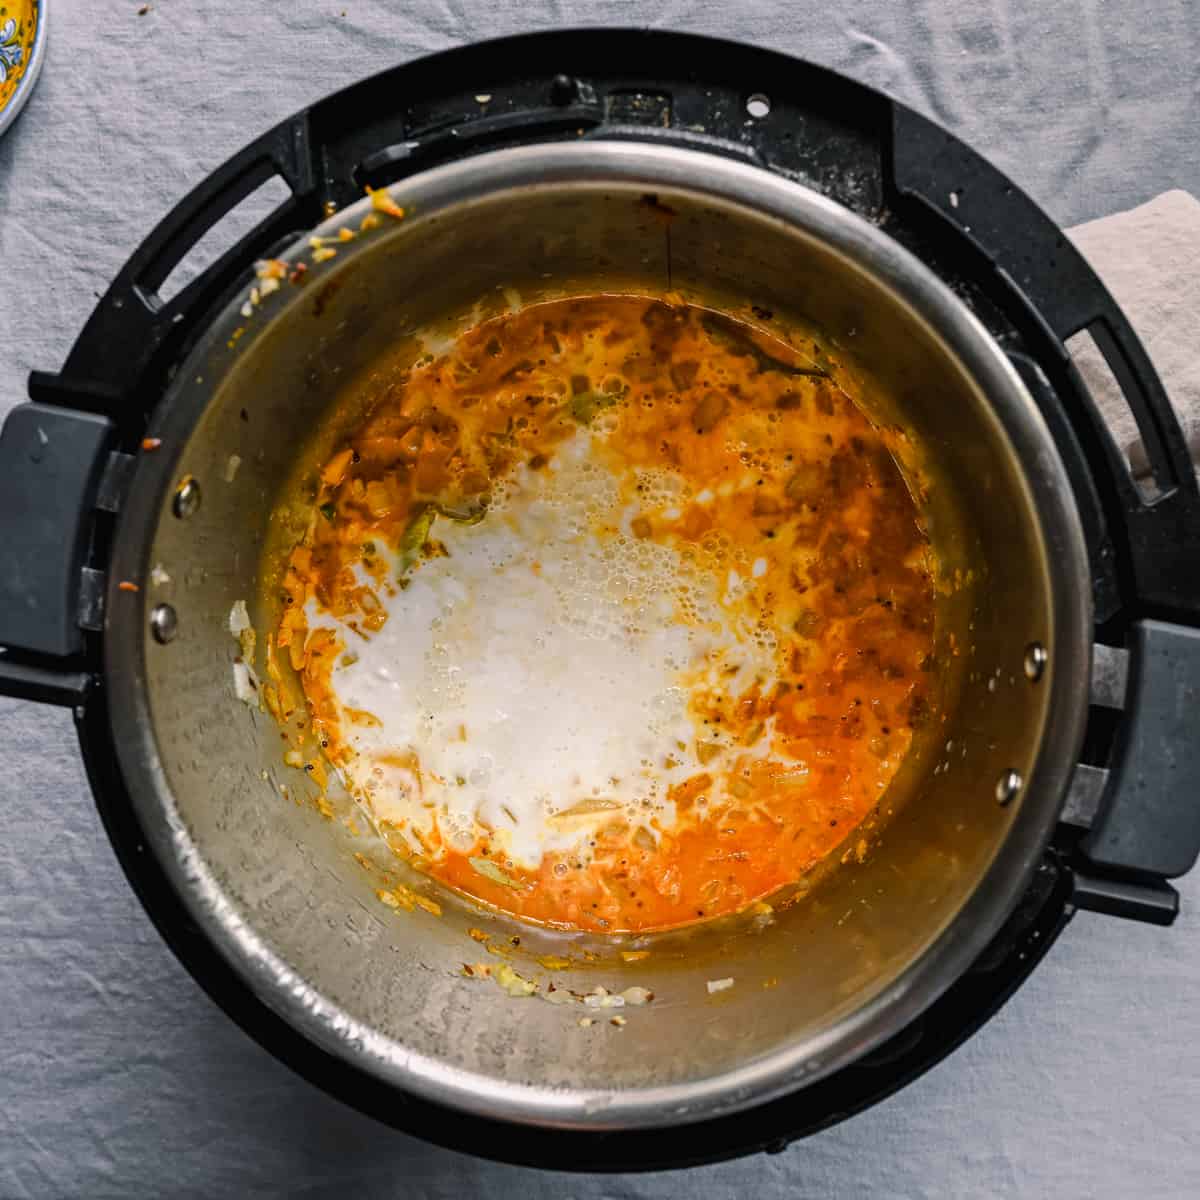 coconut milk and indian masala spices in instant pot